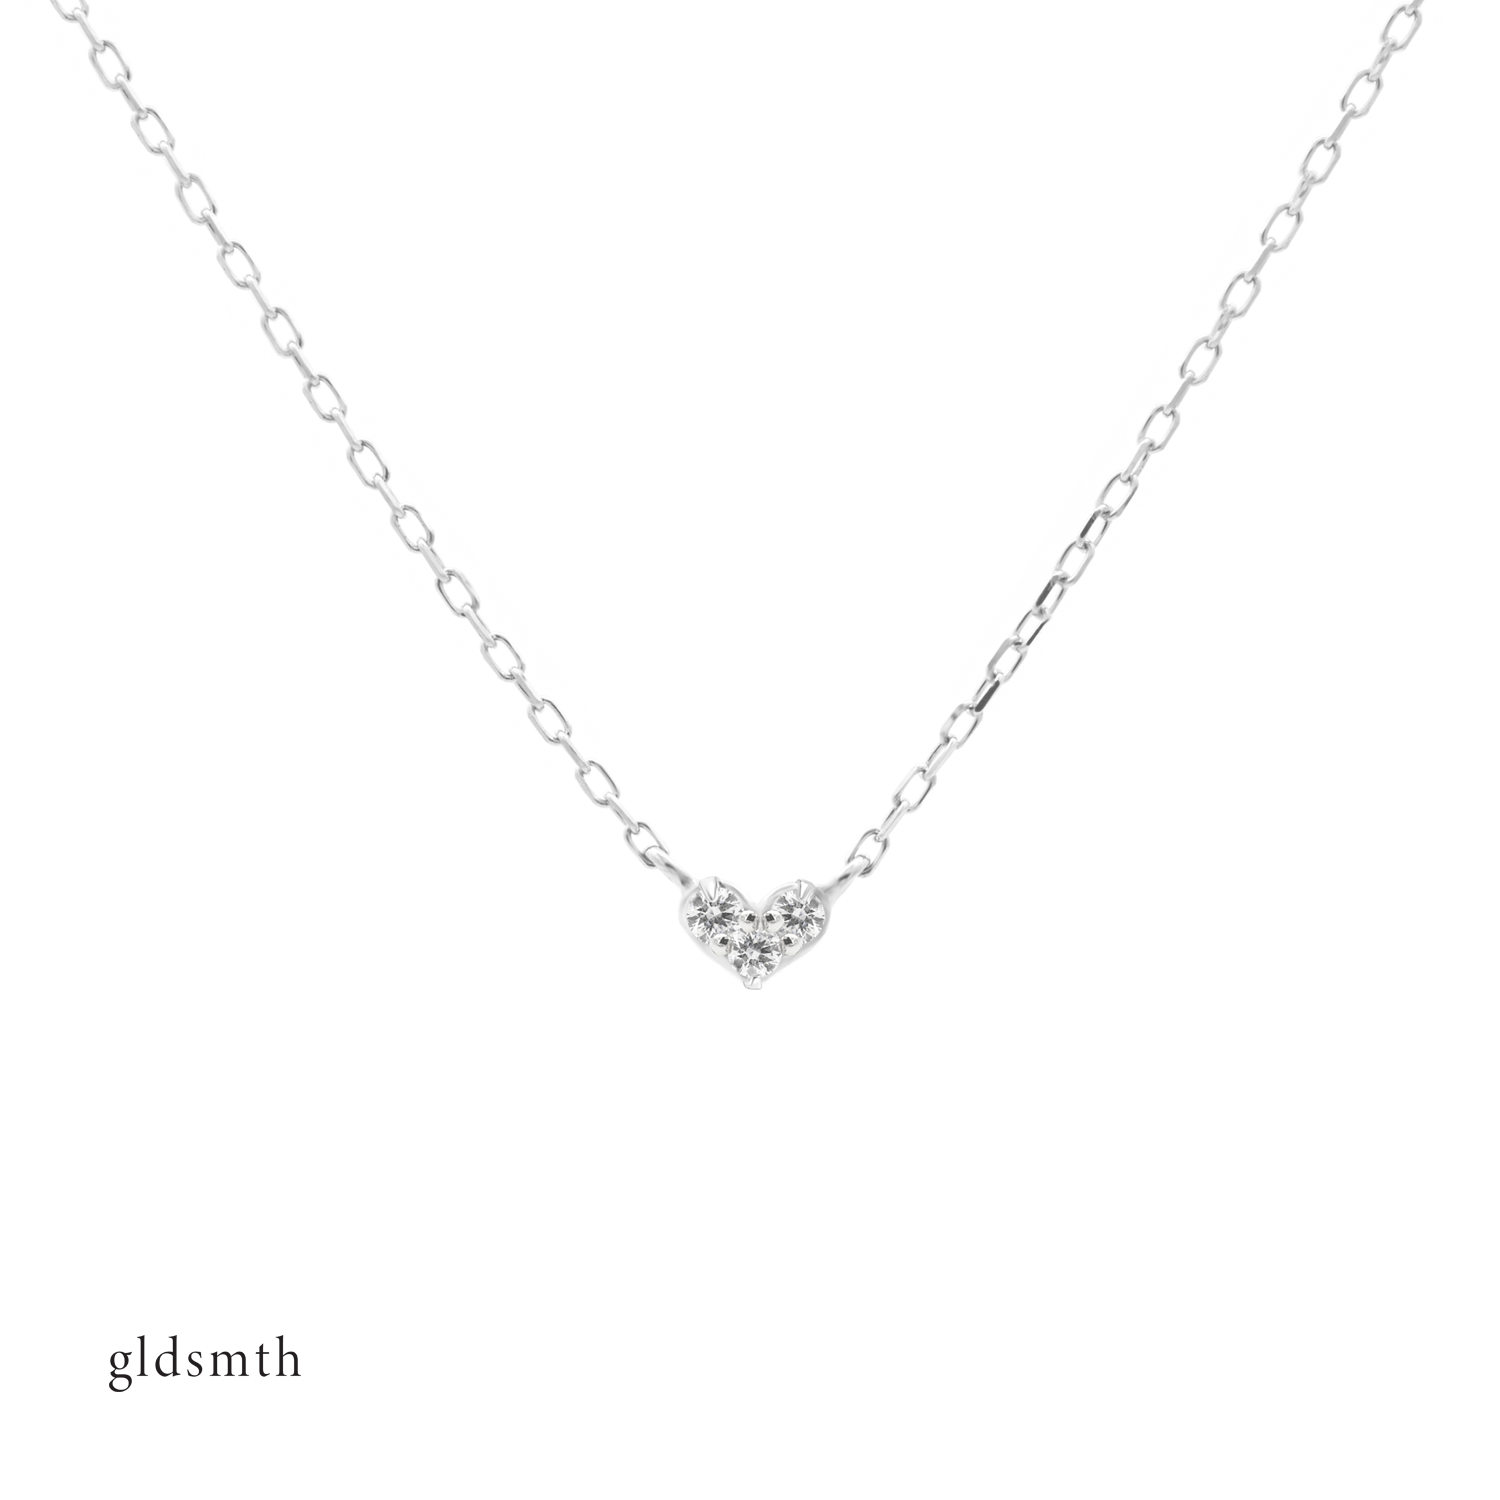 Stunning and fine handcrafted 10k solid white gold necklace with conflict-free diamonds.